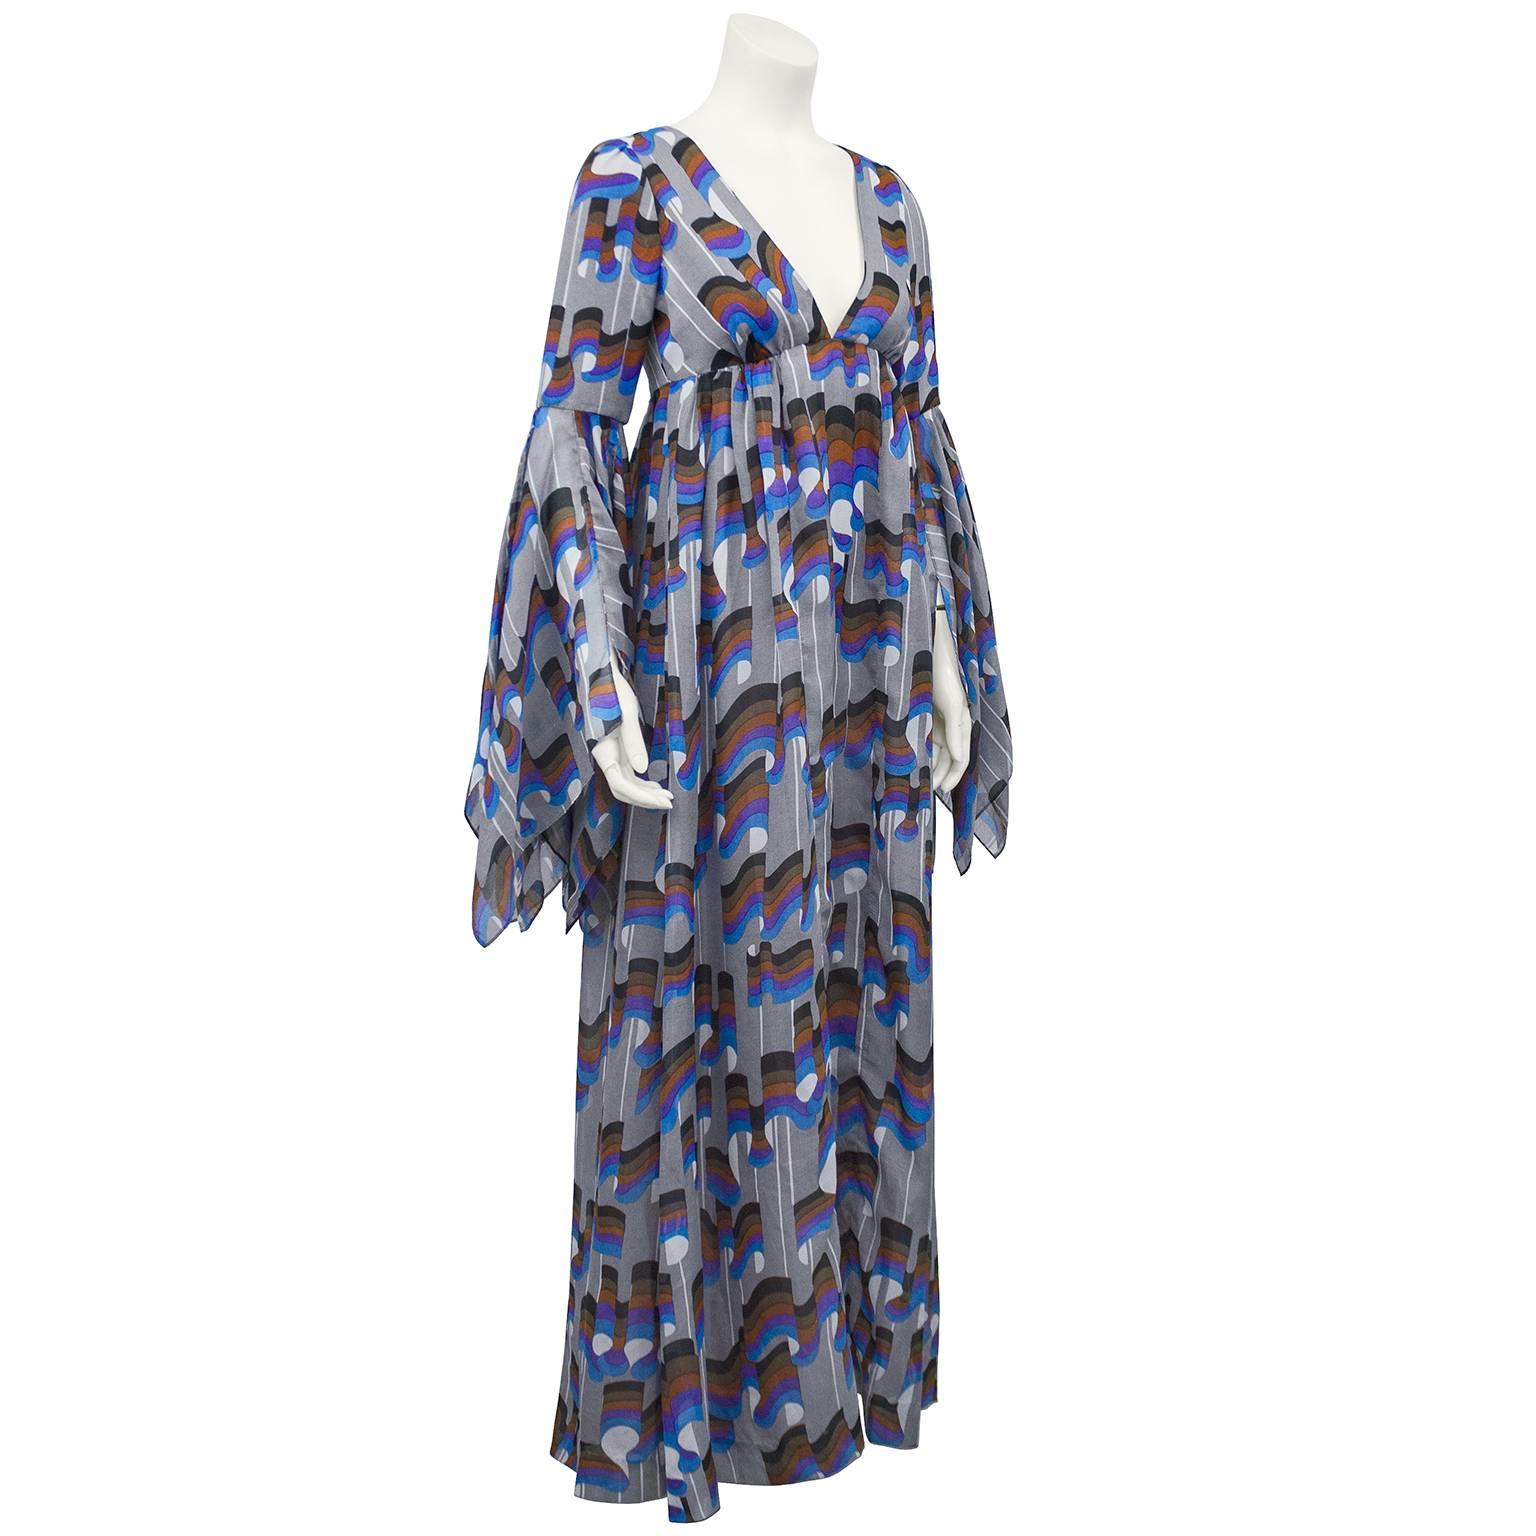 Stunning early 1970s Jean Varon boho style gown. Grey cotton with a black, brown, purple, blue and white mod print throughout. Deep v neck, empire waist and long, full skirt. Sleeves cinch just above elbow and flare out with a hanky hem. Excellent